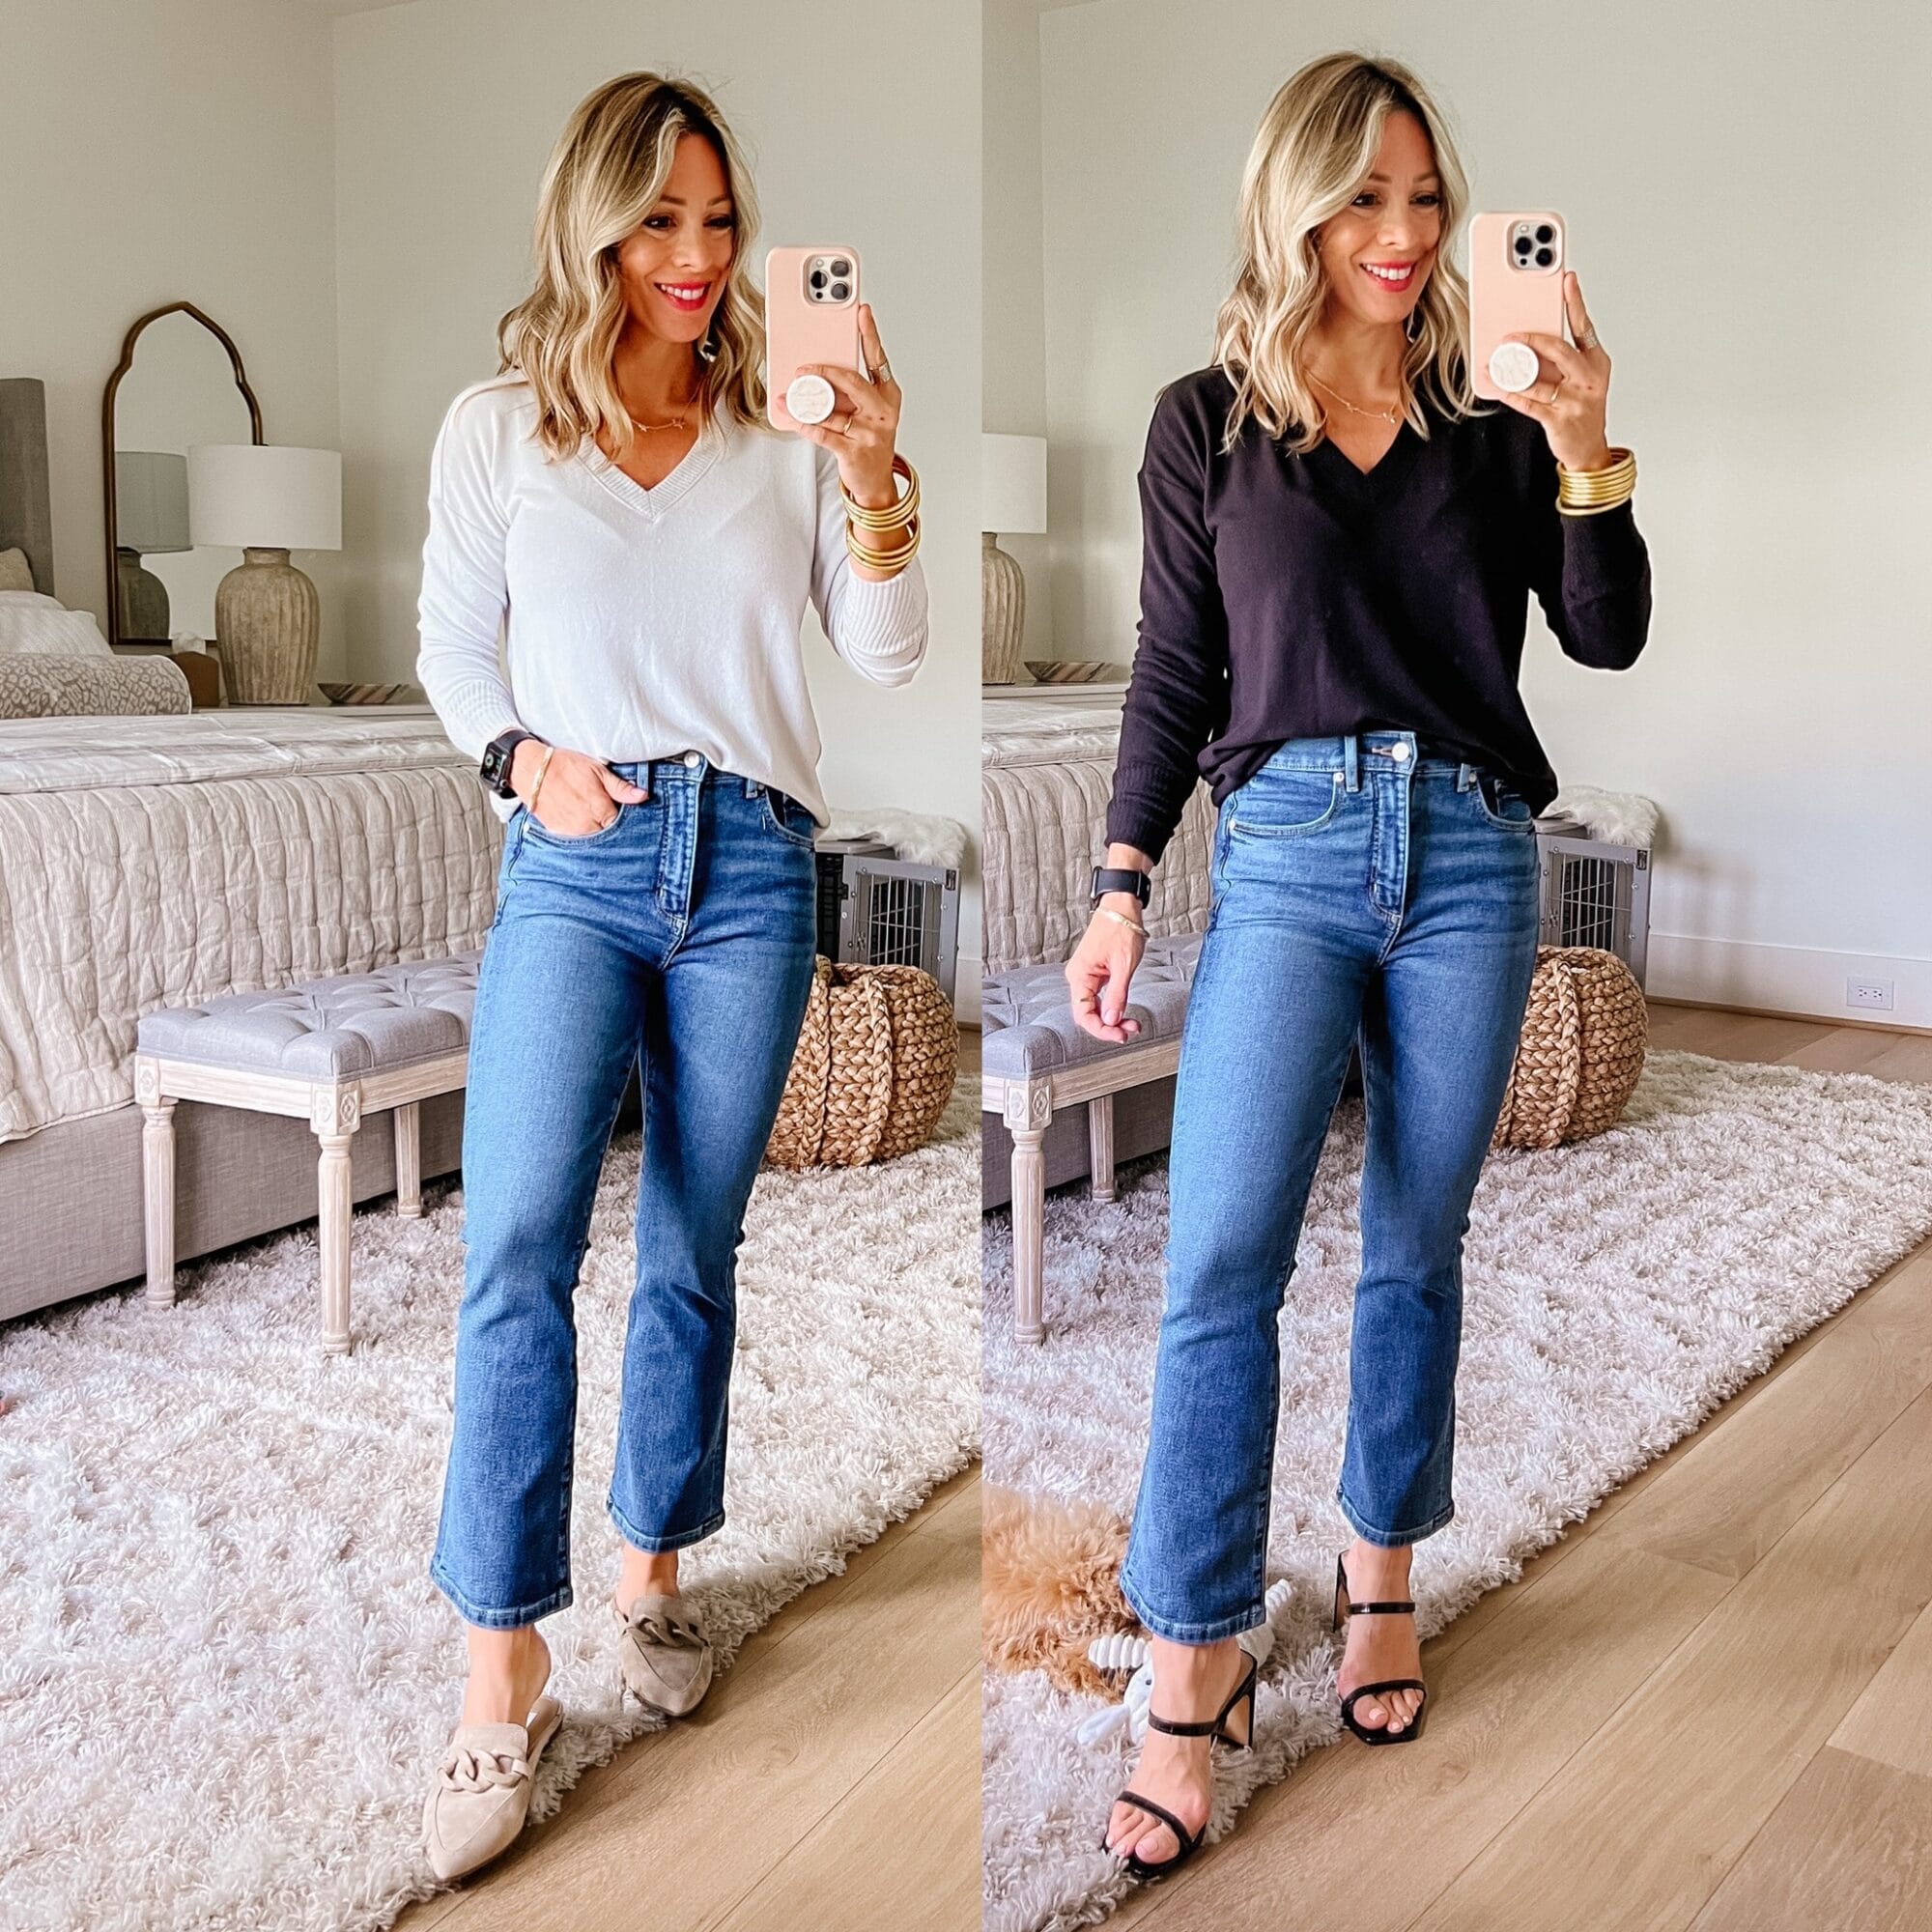 V Neck Sweater, Jeans, Mules, Sandals 